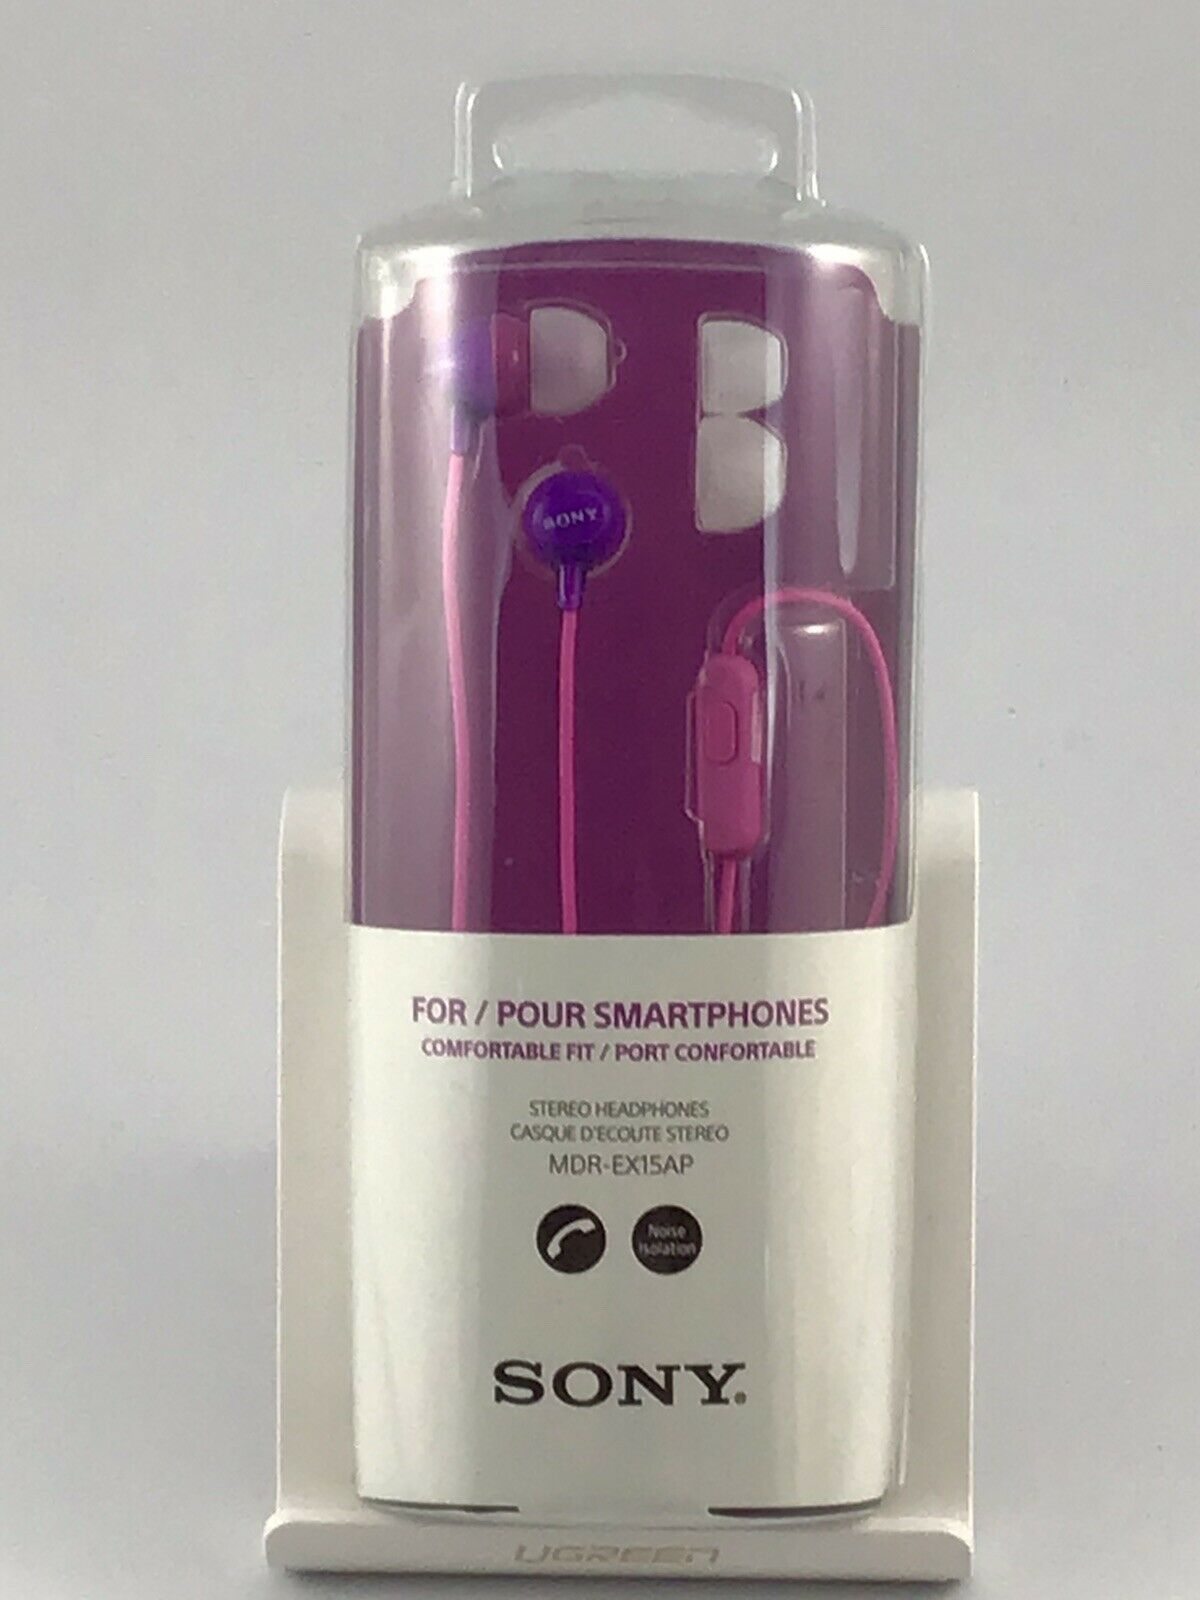 Sony Fashionable Wired Headset for Smartphones - Violet